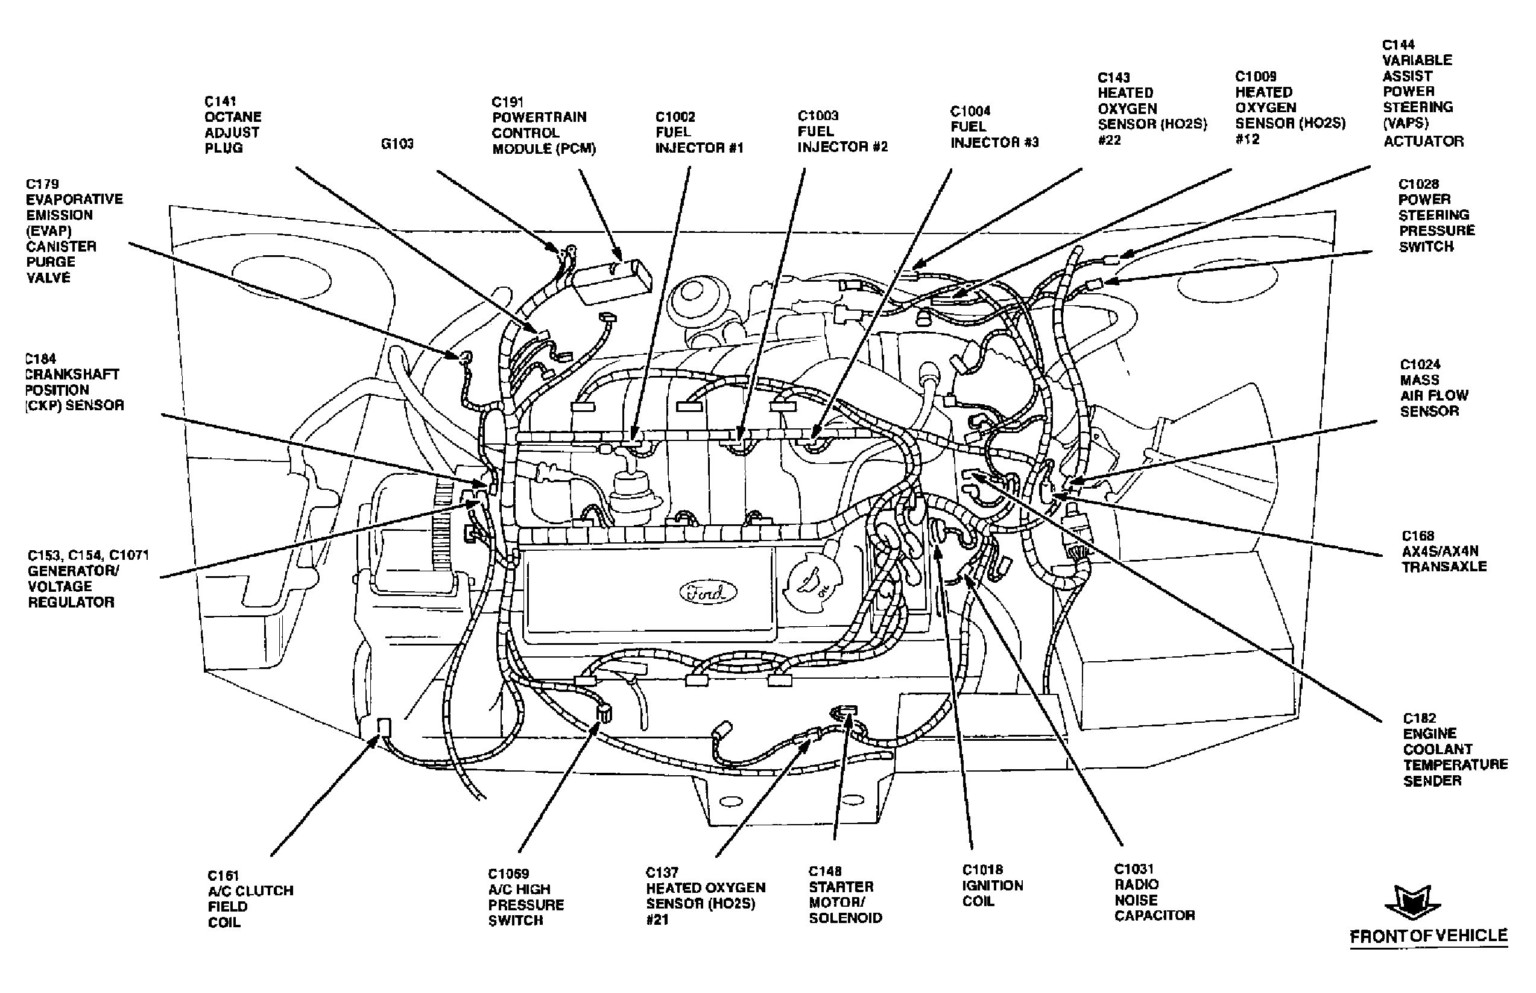 Diagram Ford Taurus V6 Engine Diagram Full Version Hd Wiring And